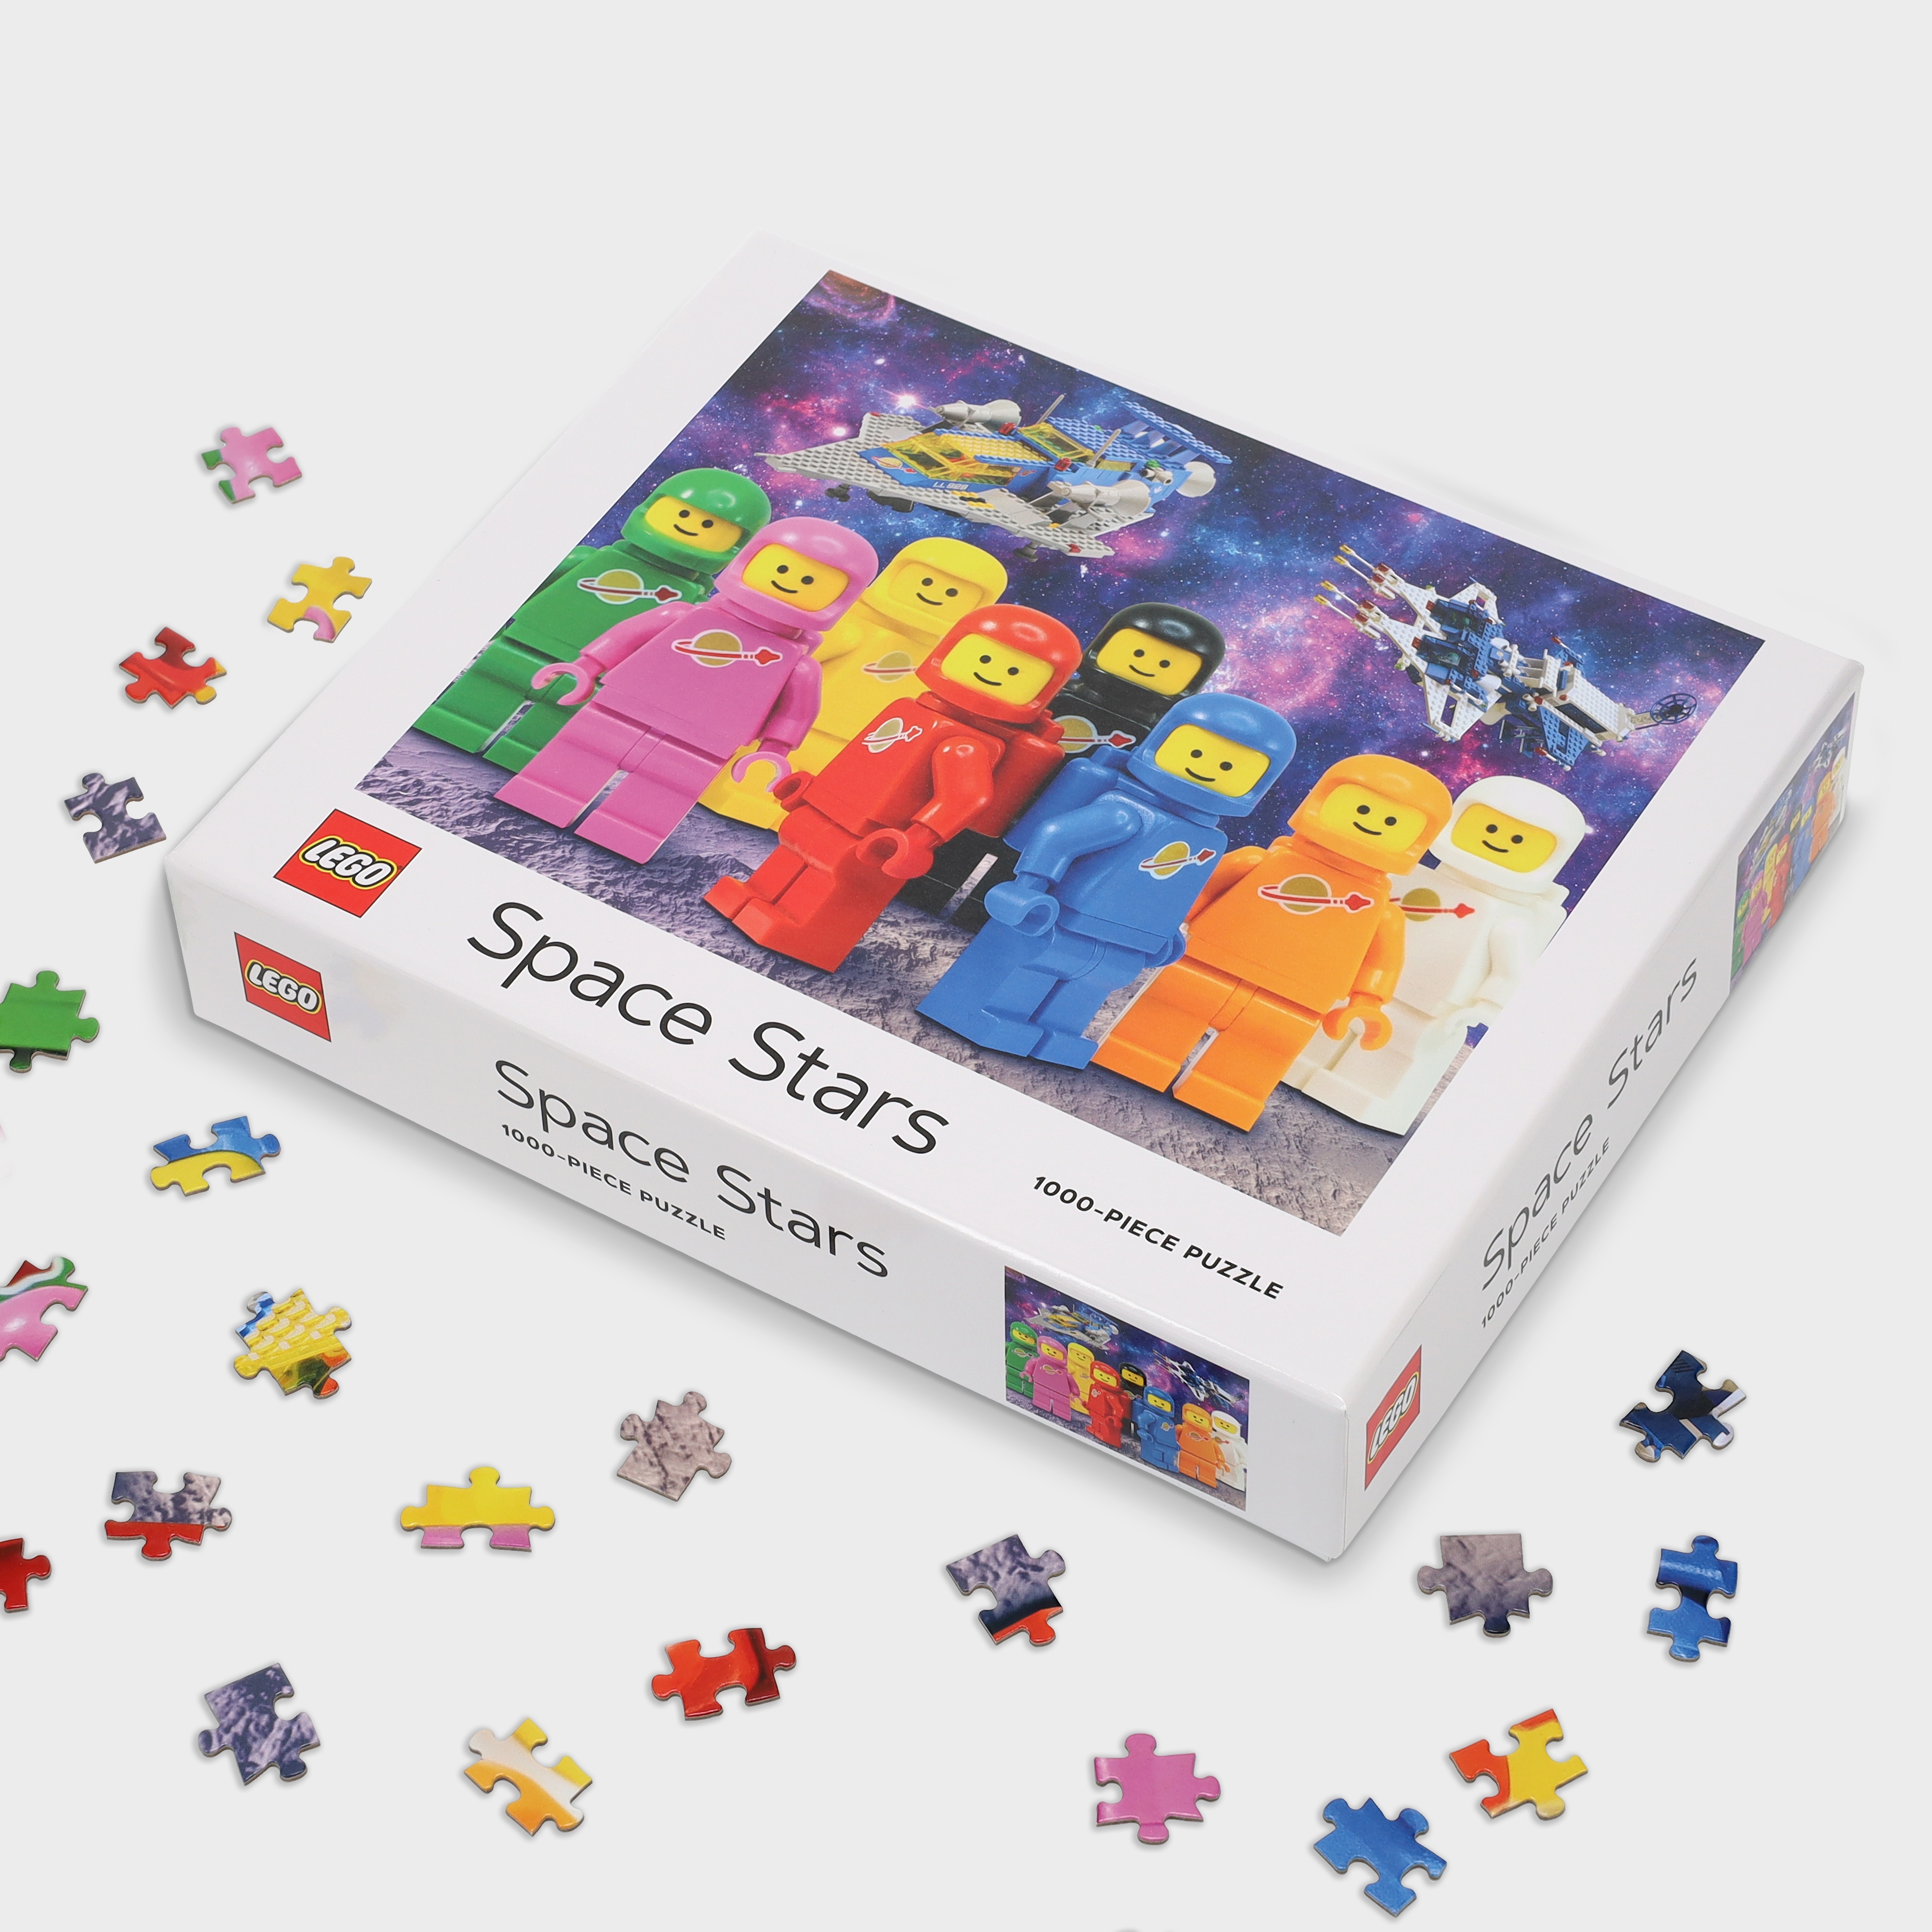 Space Stars 1,000-Piece Puzzle 5007066, UNKNOWN